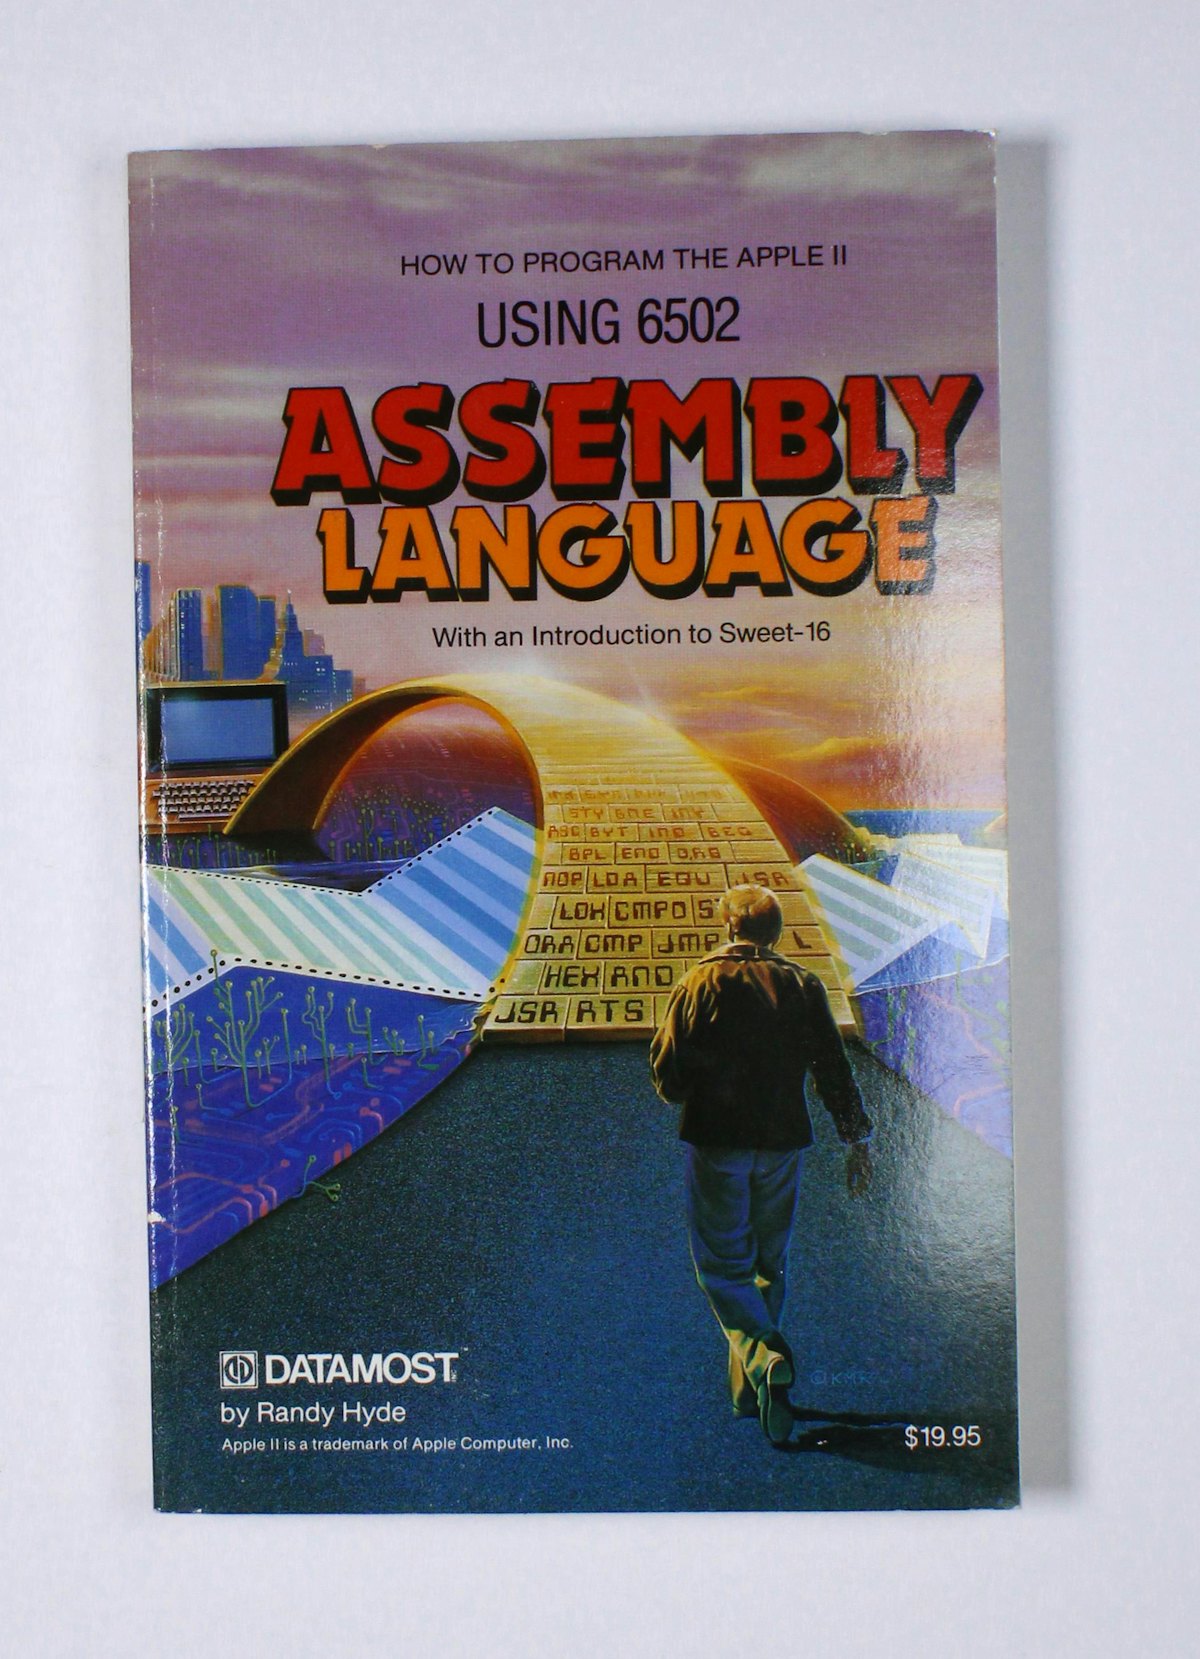 Using 6502 Assembly Language: How Anyone Can Program the Apple II